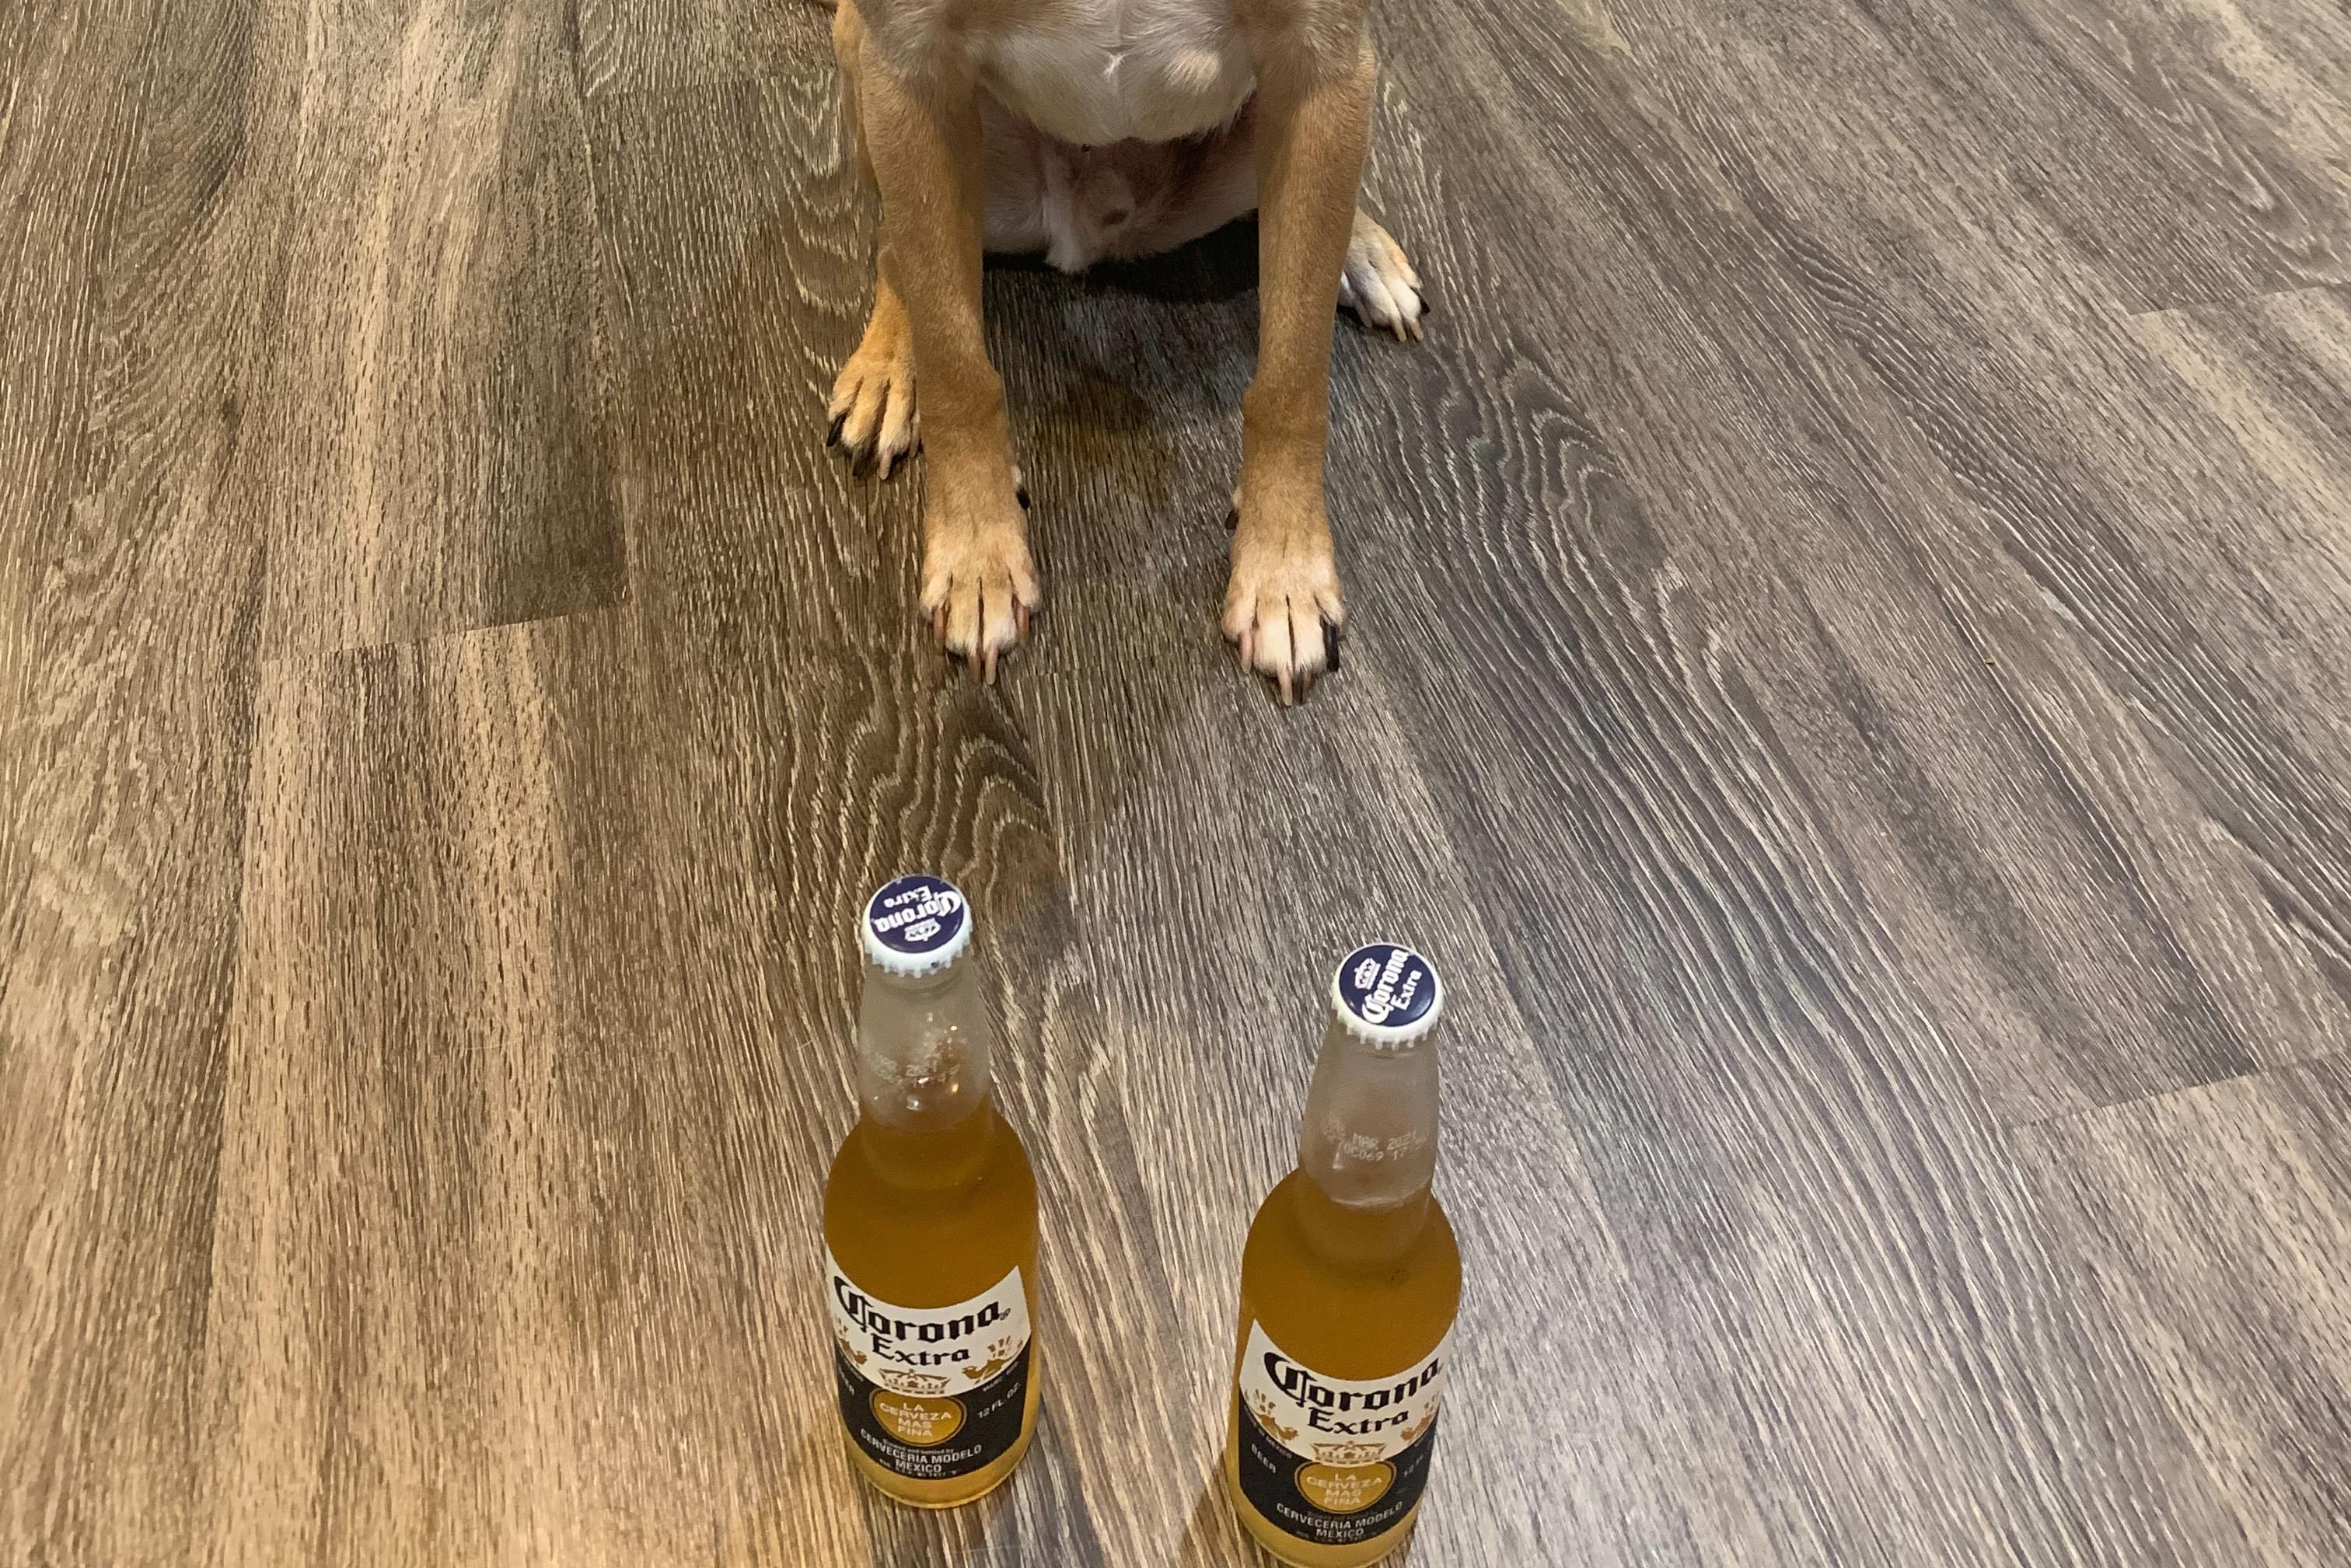 2 Beers And A Puppy Determine Who You Can Trust